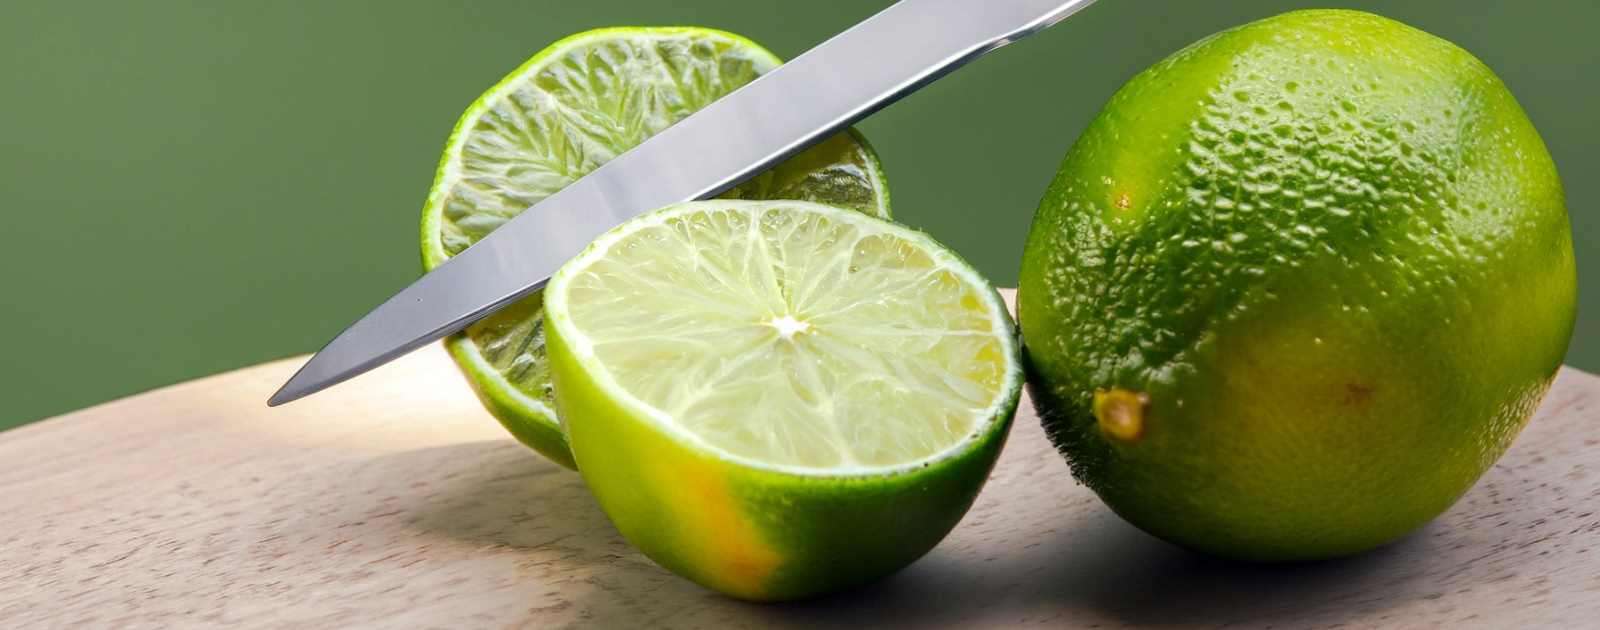 Is Lime Acidic or Basic?